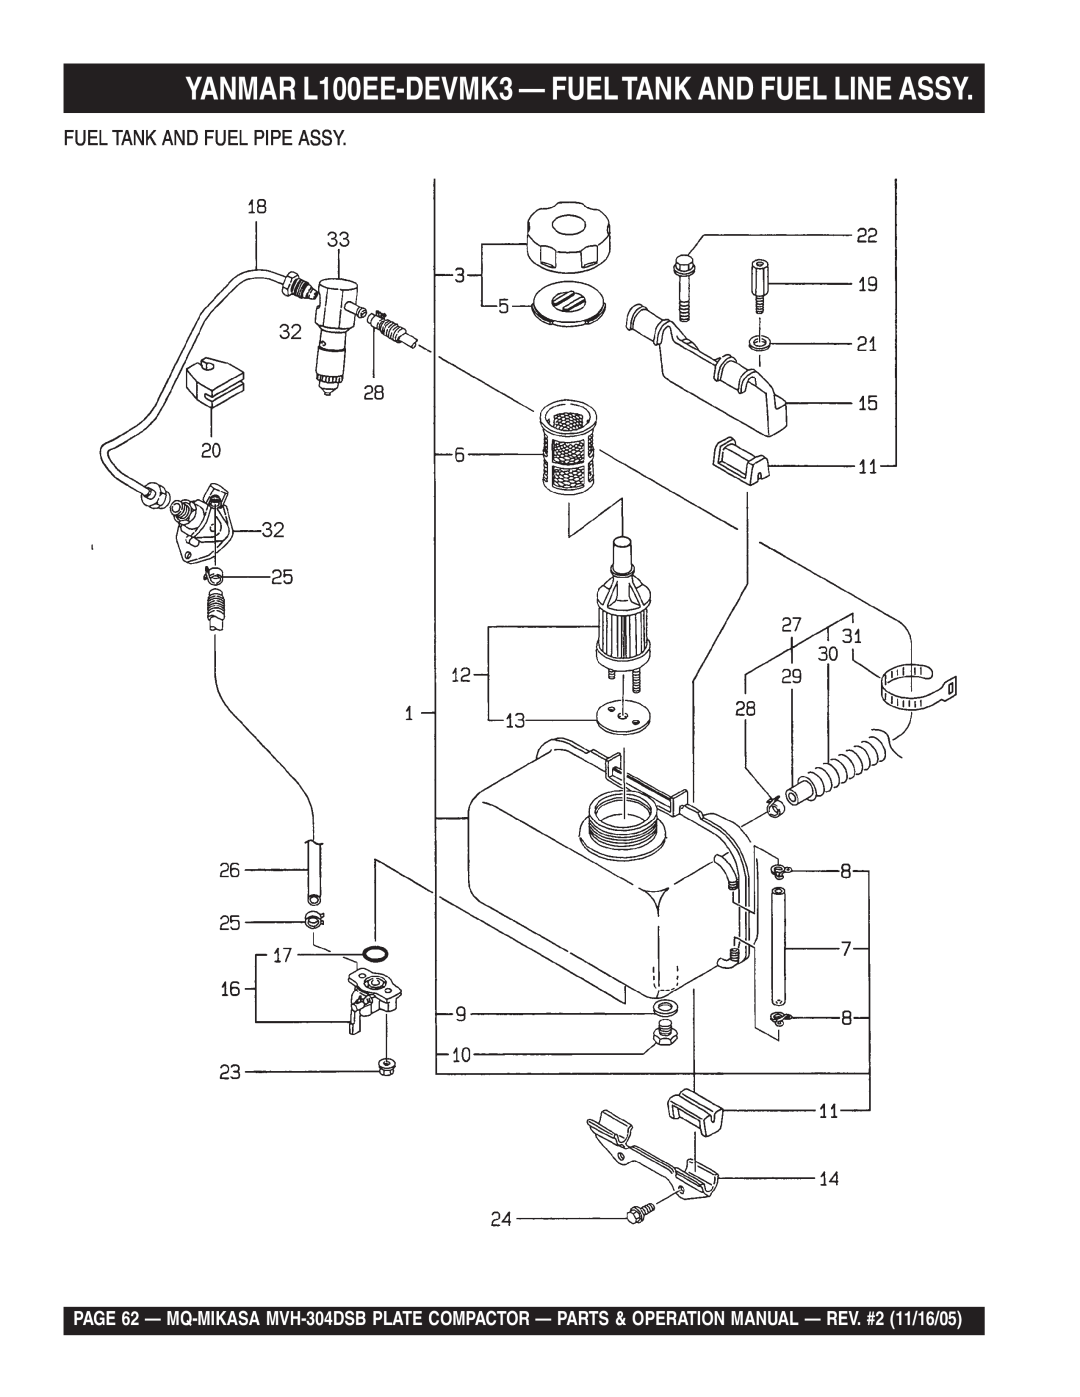 Multiquip MVH-304DSB operation manual YANMAR L100EE-DEVMK3 - FUELTANK AND FUEL LINE ASSY, Fuel Tank And Fuel Pipe Assy 